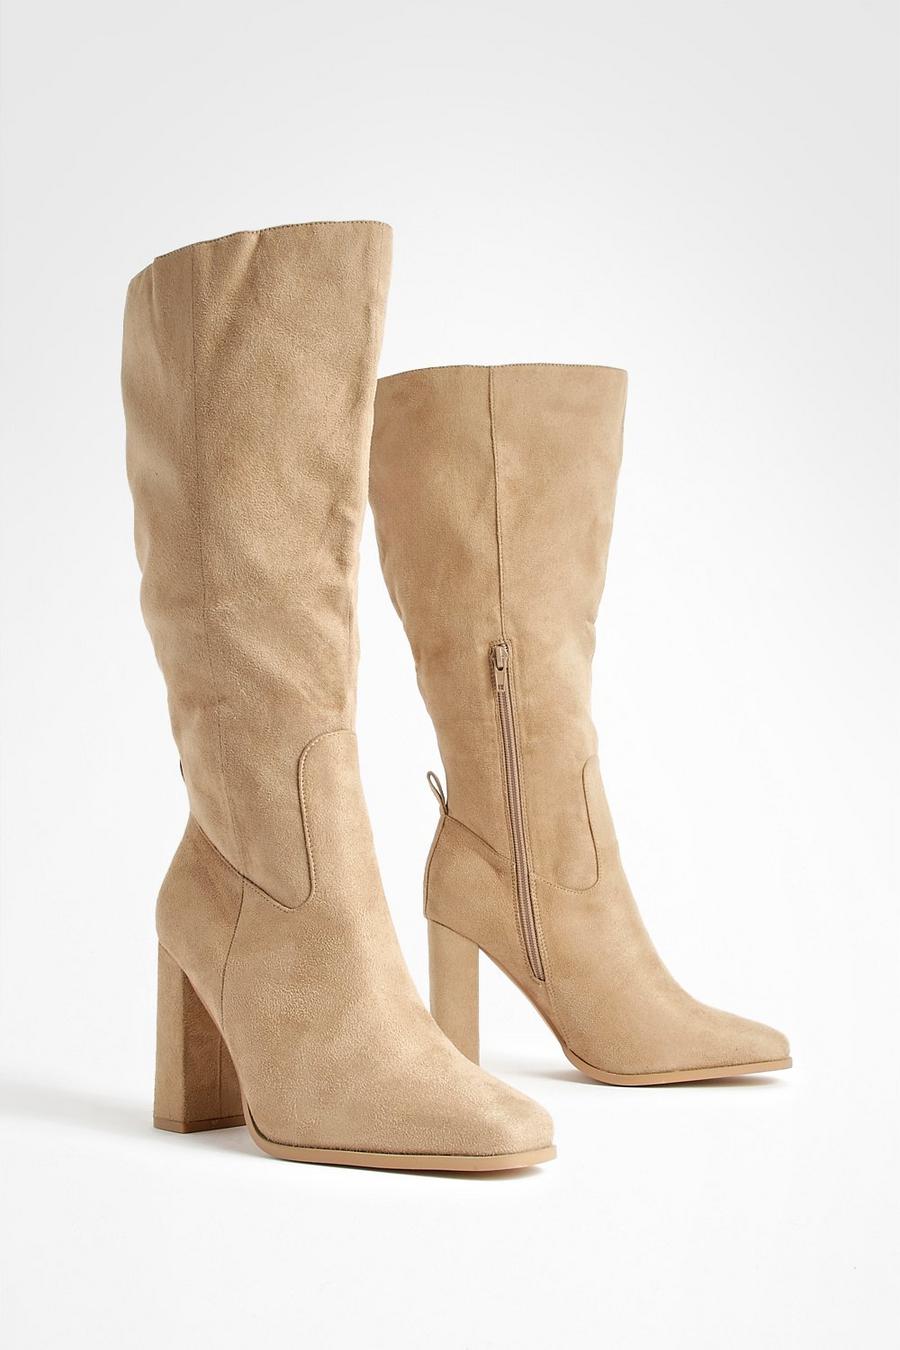 Taupe Wide Fit Block Heel Knee High Boots  